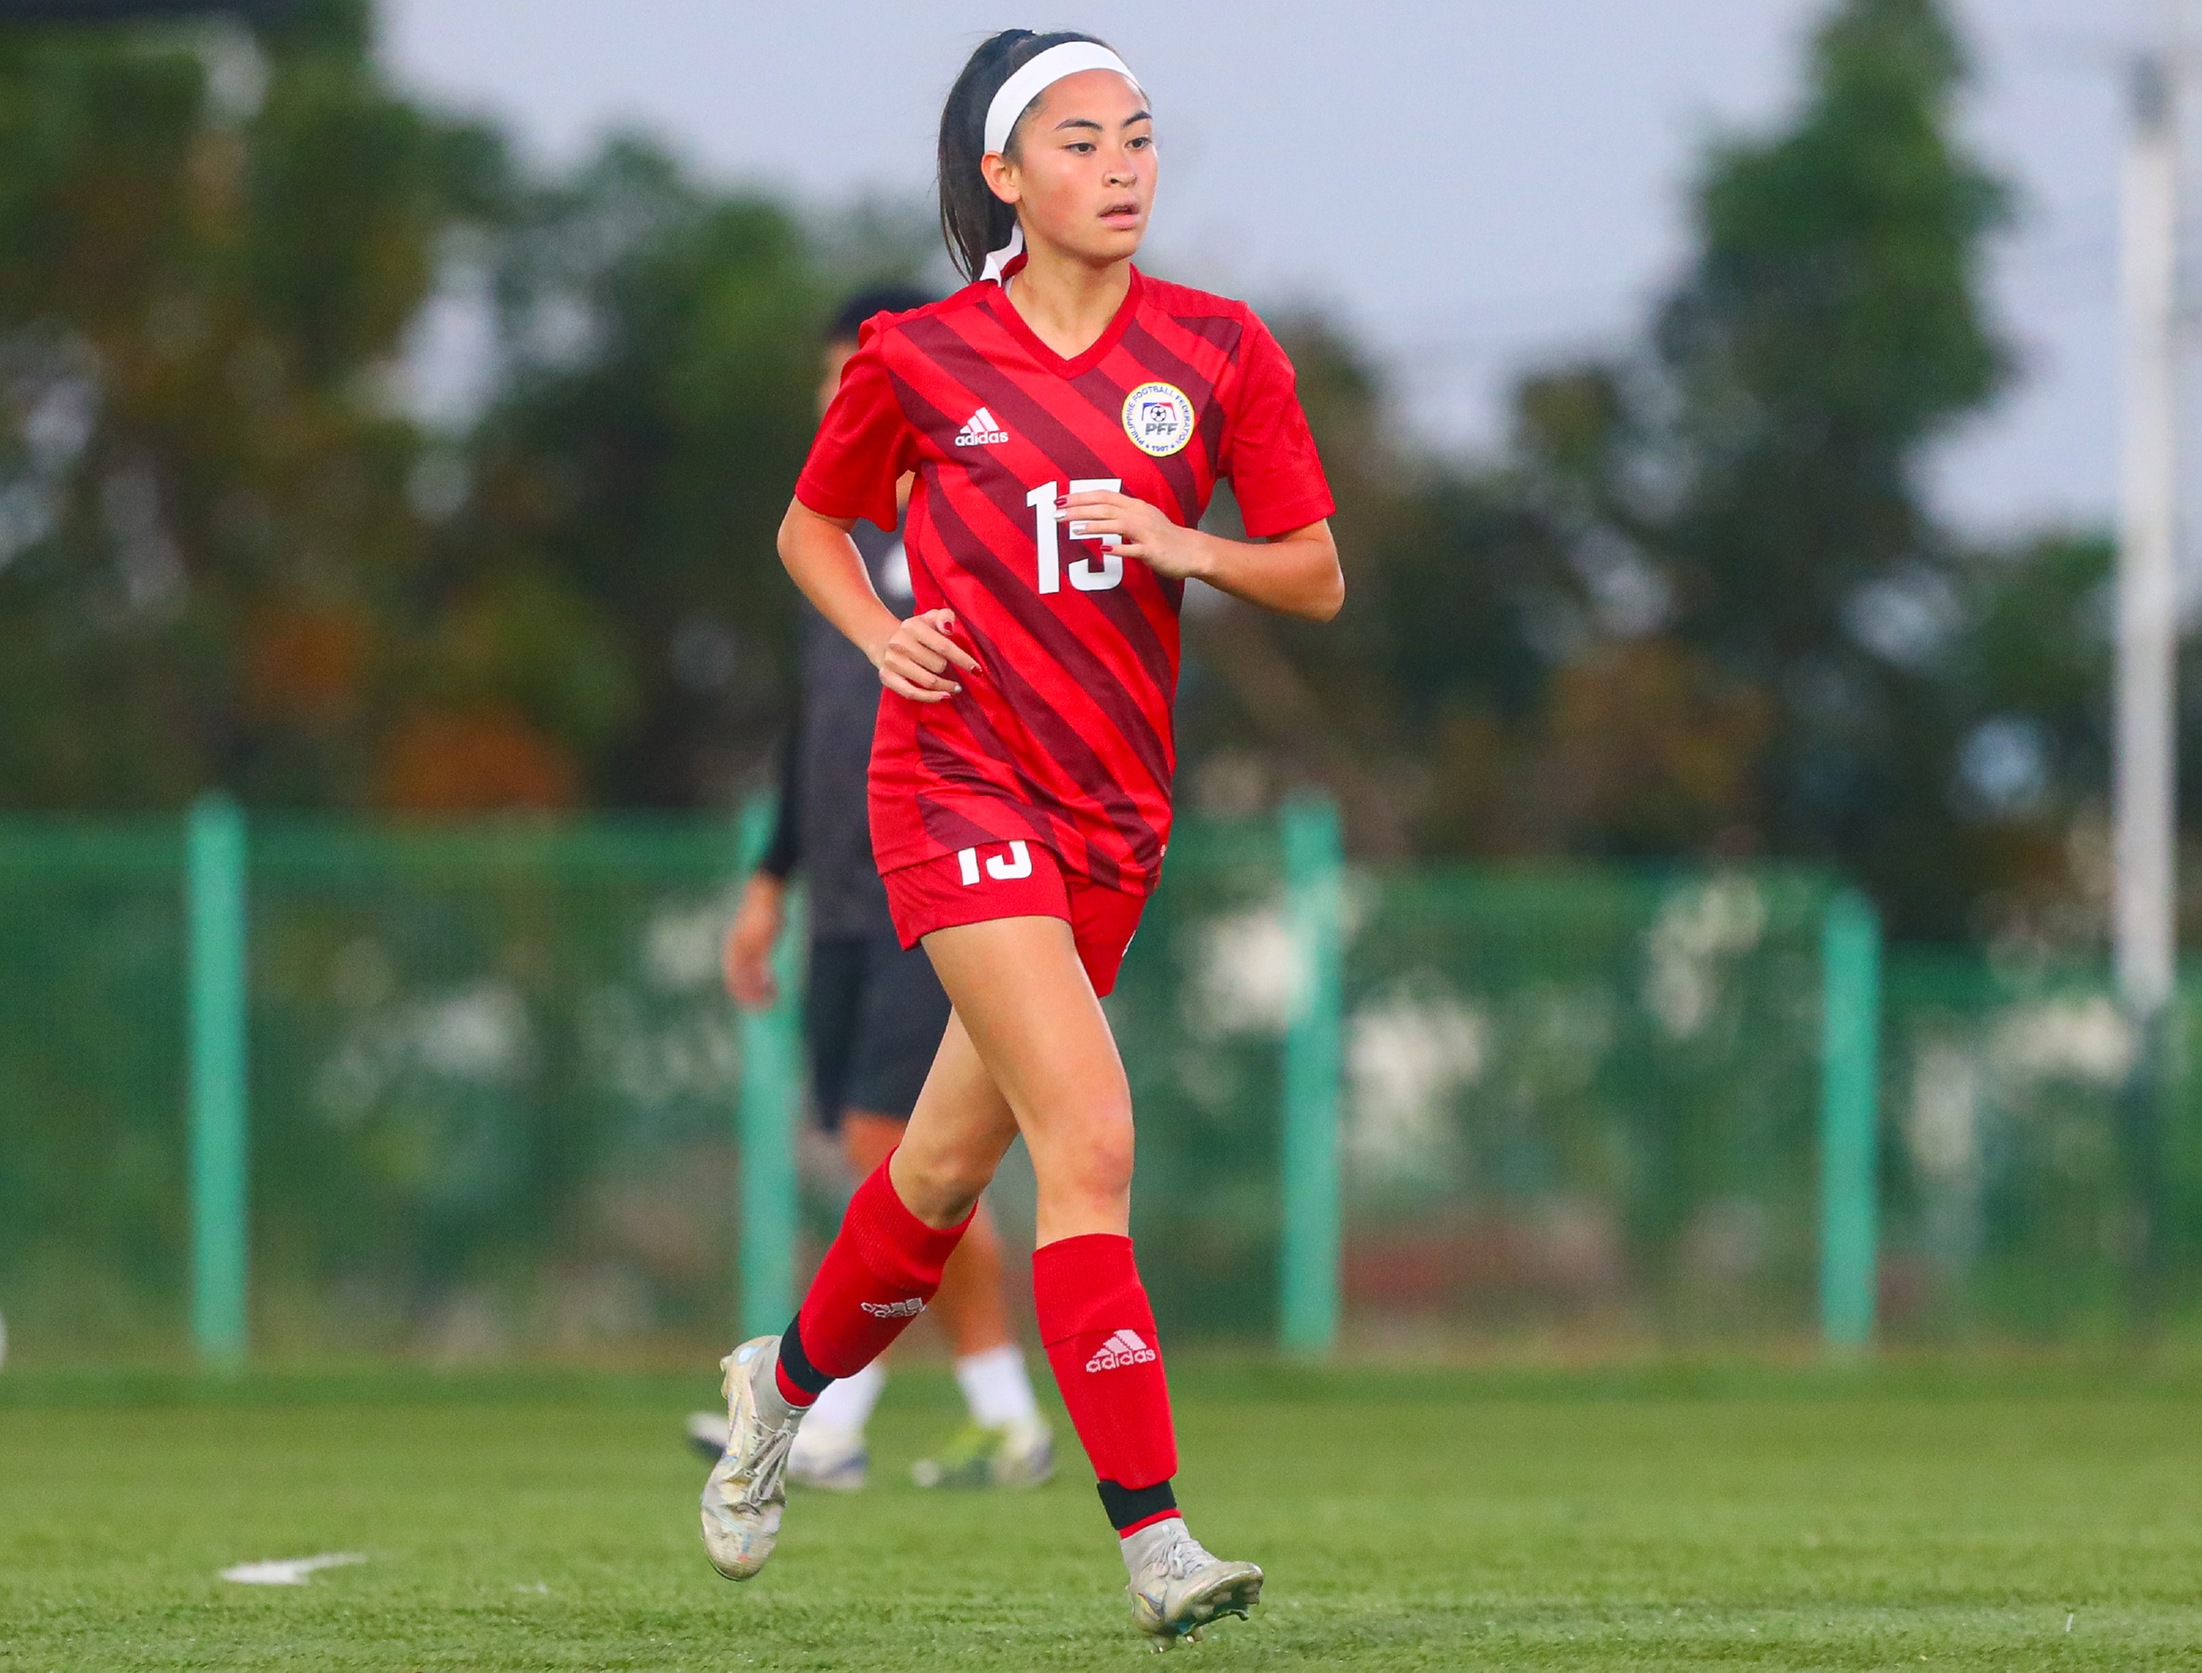 kylie yap runs toward the midfield during a high school game